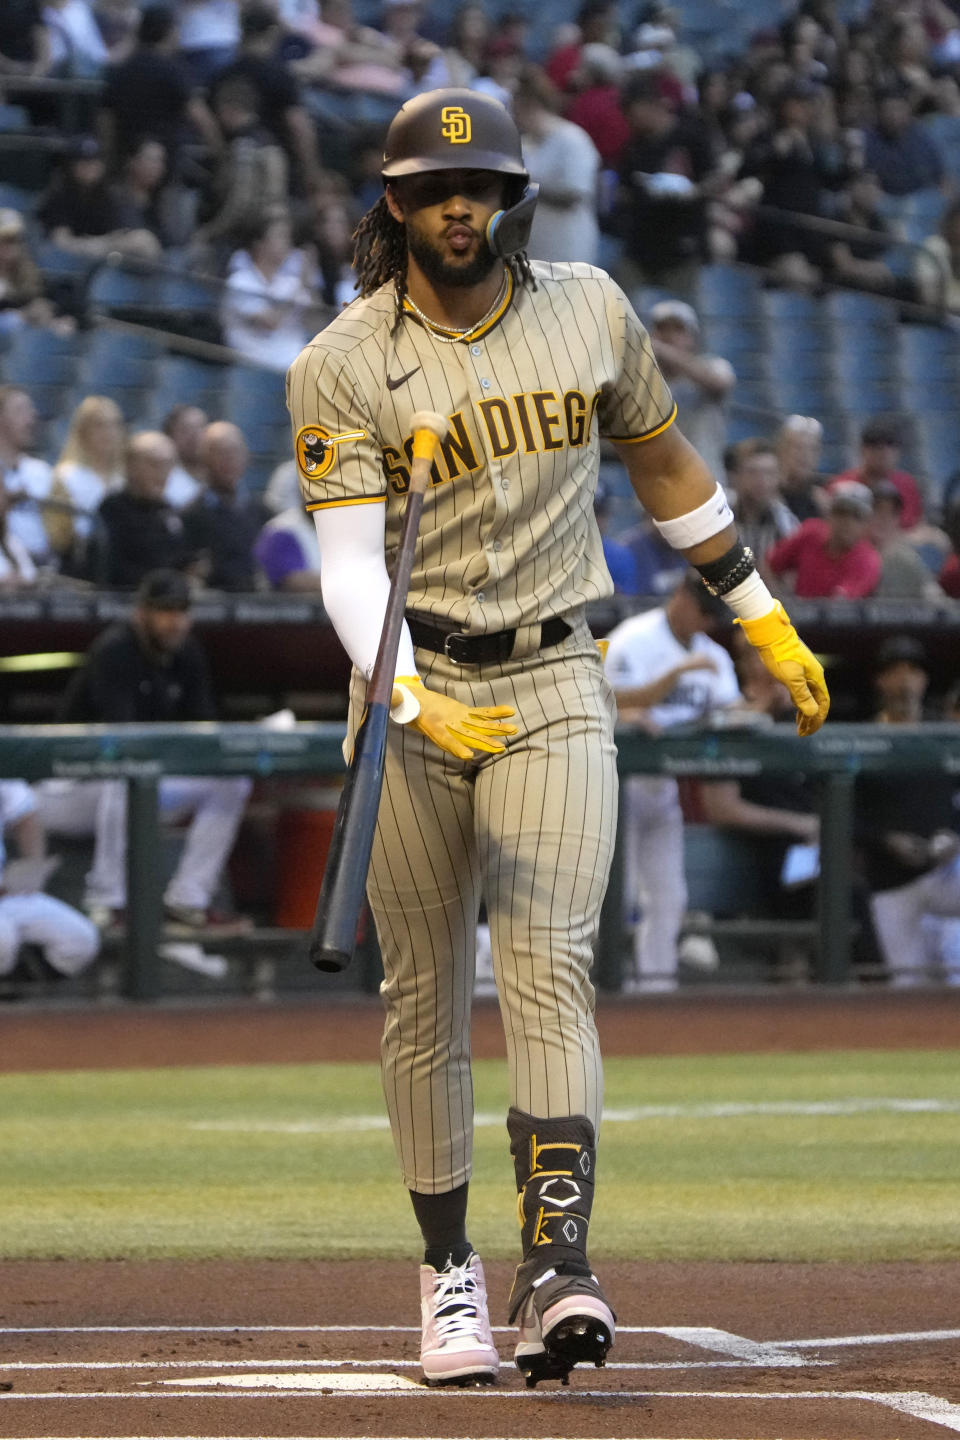 San Diego Padres' Fernando Tatis Jr. reacts after striking out during the first inning of the team's baseball game against the Arizona Diamondbacks, Thursday, April 20, 2023, in Phoenix. (AP Photo/Rick Scuteri)